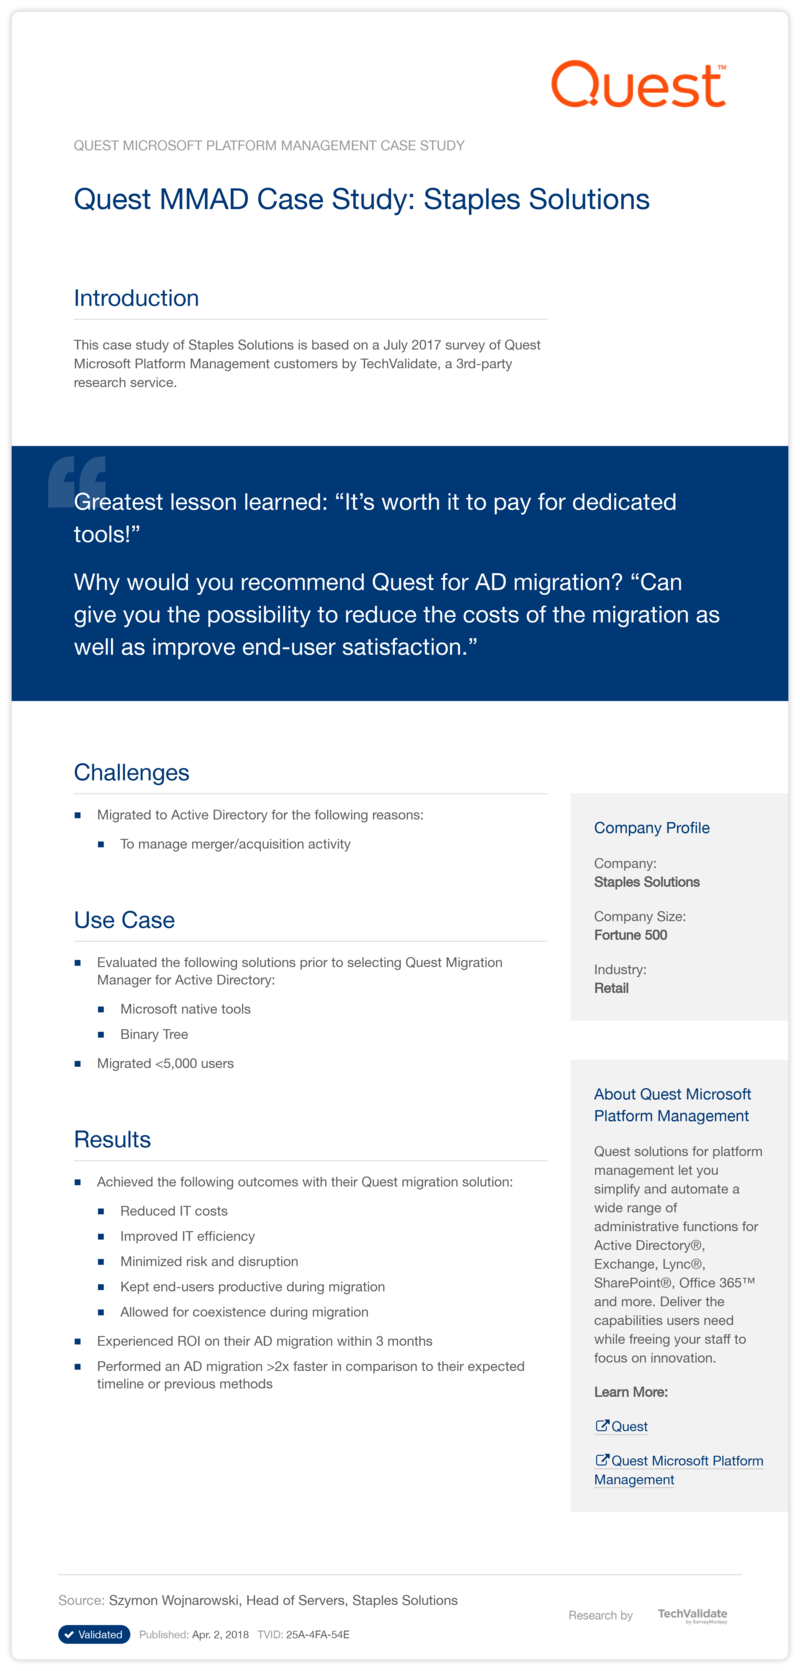 Quest MMAD Case Study: Staples Solutions